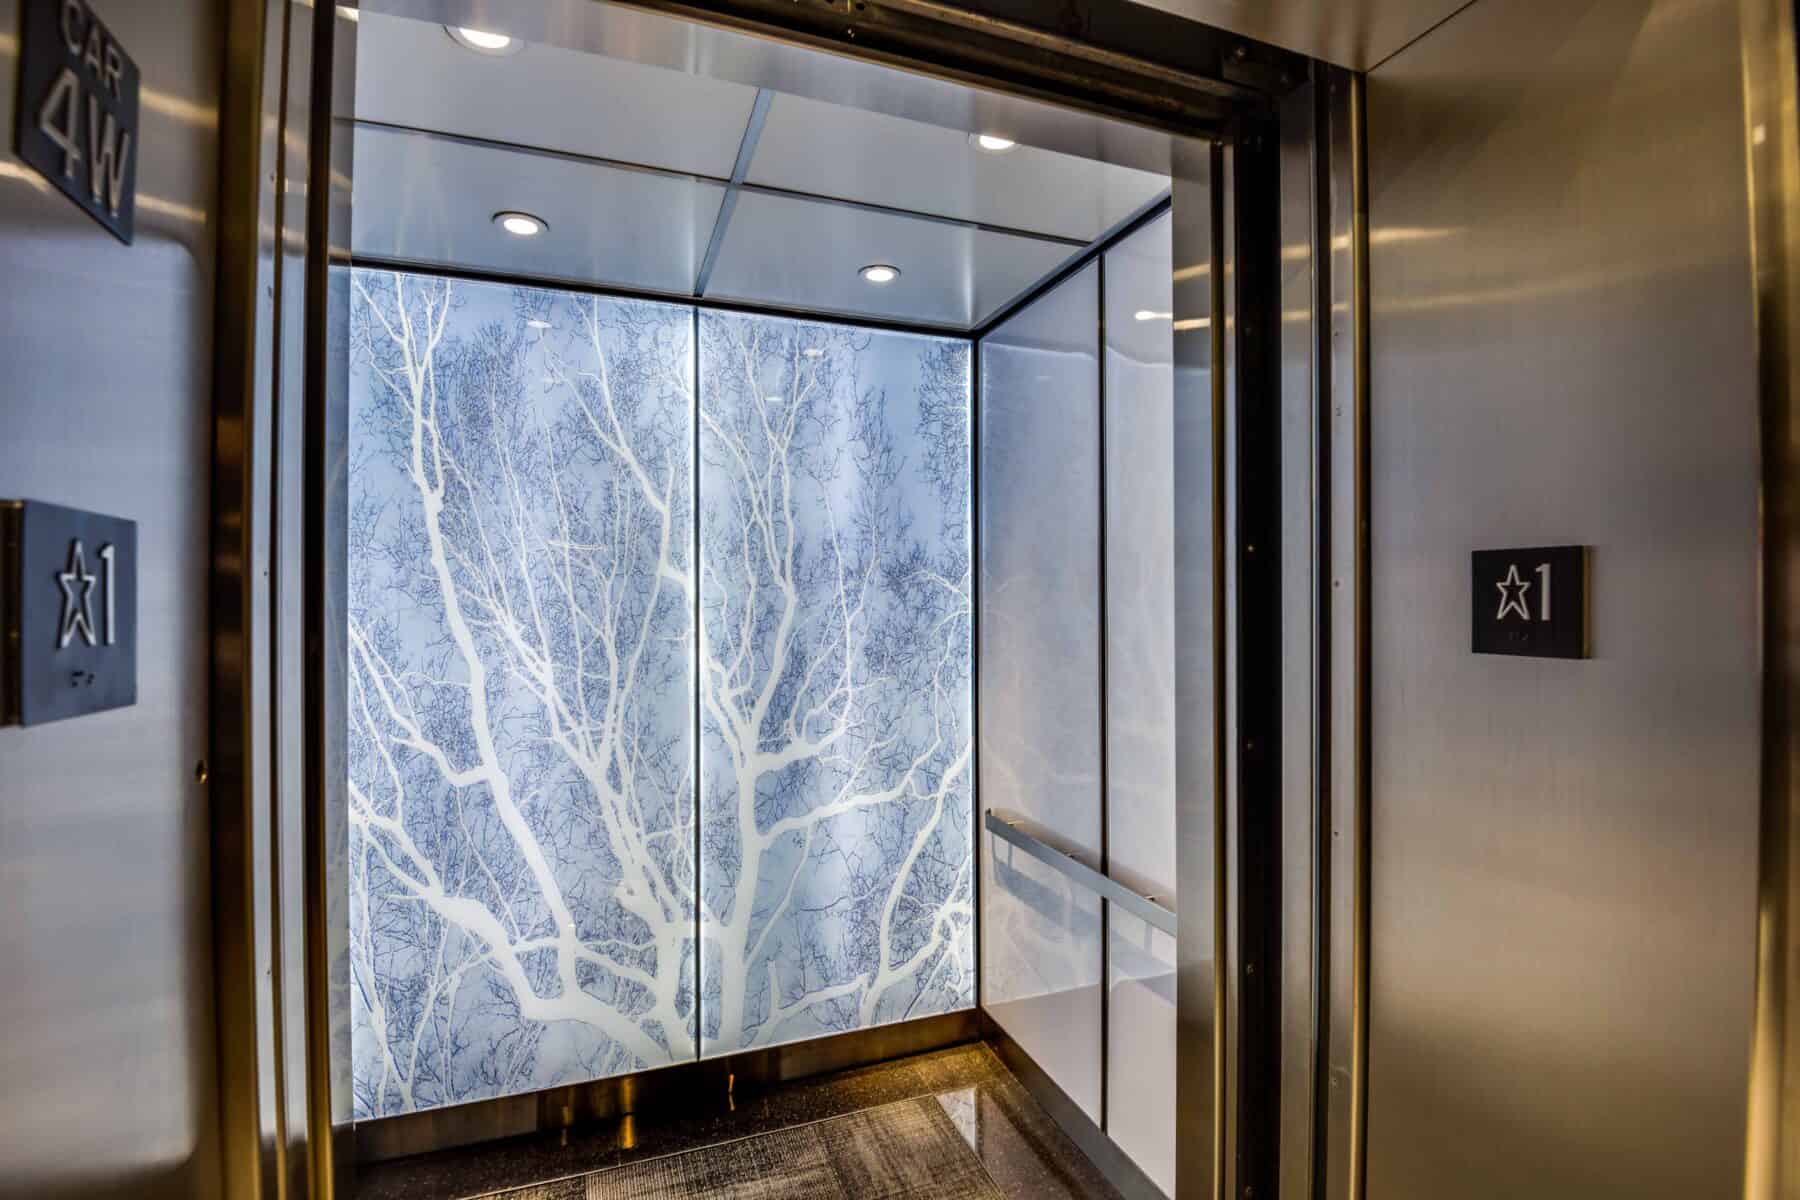 Custom Fabrication of Architectural Backlit Custom Image Glass Panels for Elevators for Construction Specialty Projects by Commercial Builder & General Contractor Structural Enterprises